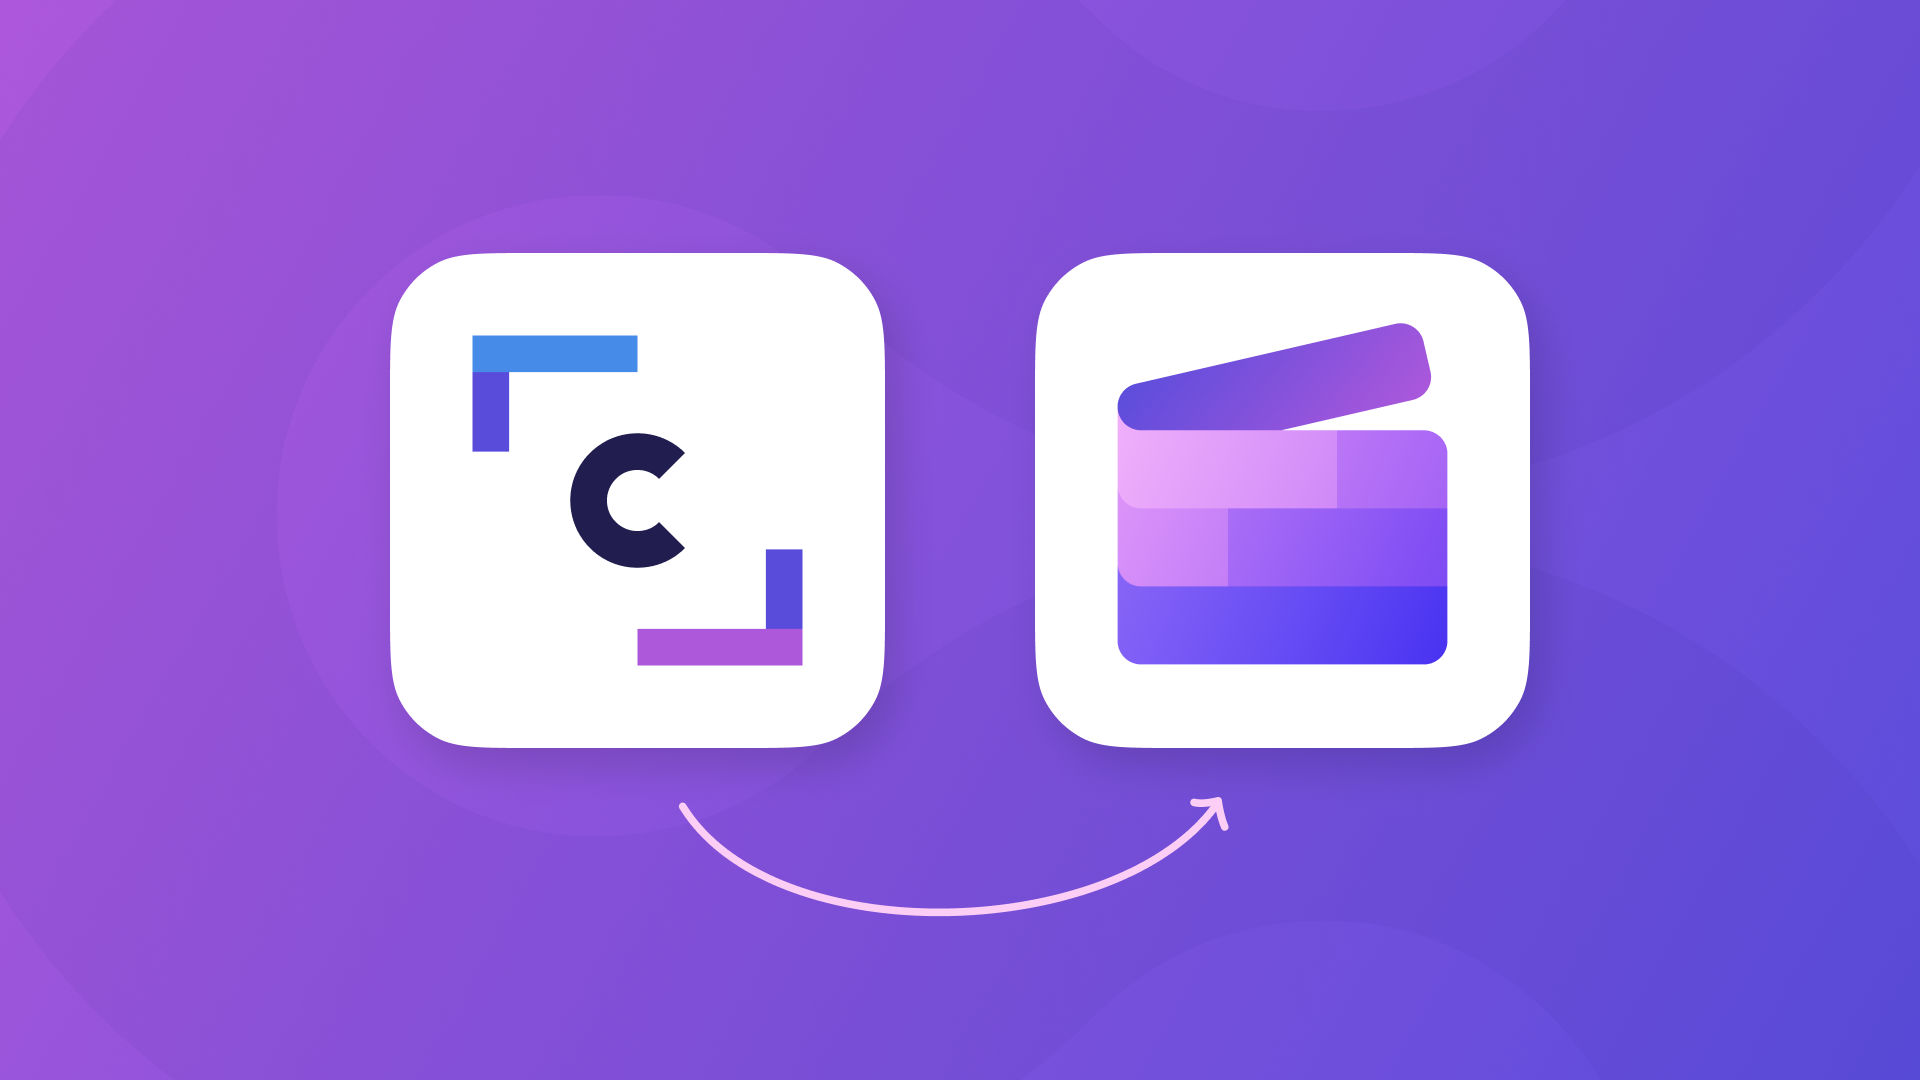 Clipchamp brand logo changes from a C design to a purple clapperboard design in July 2022